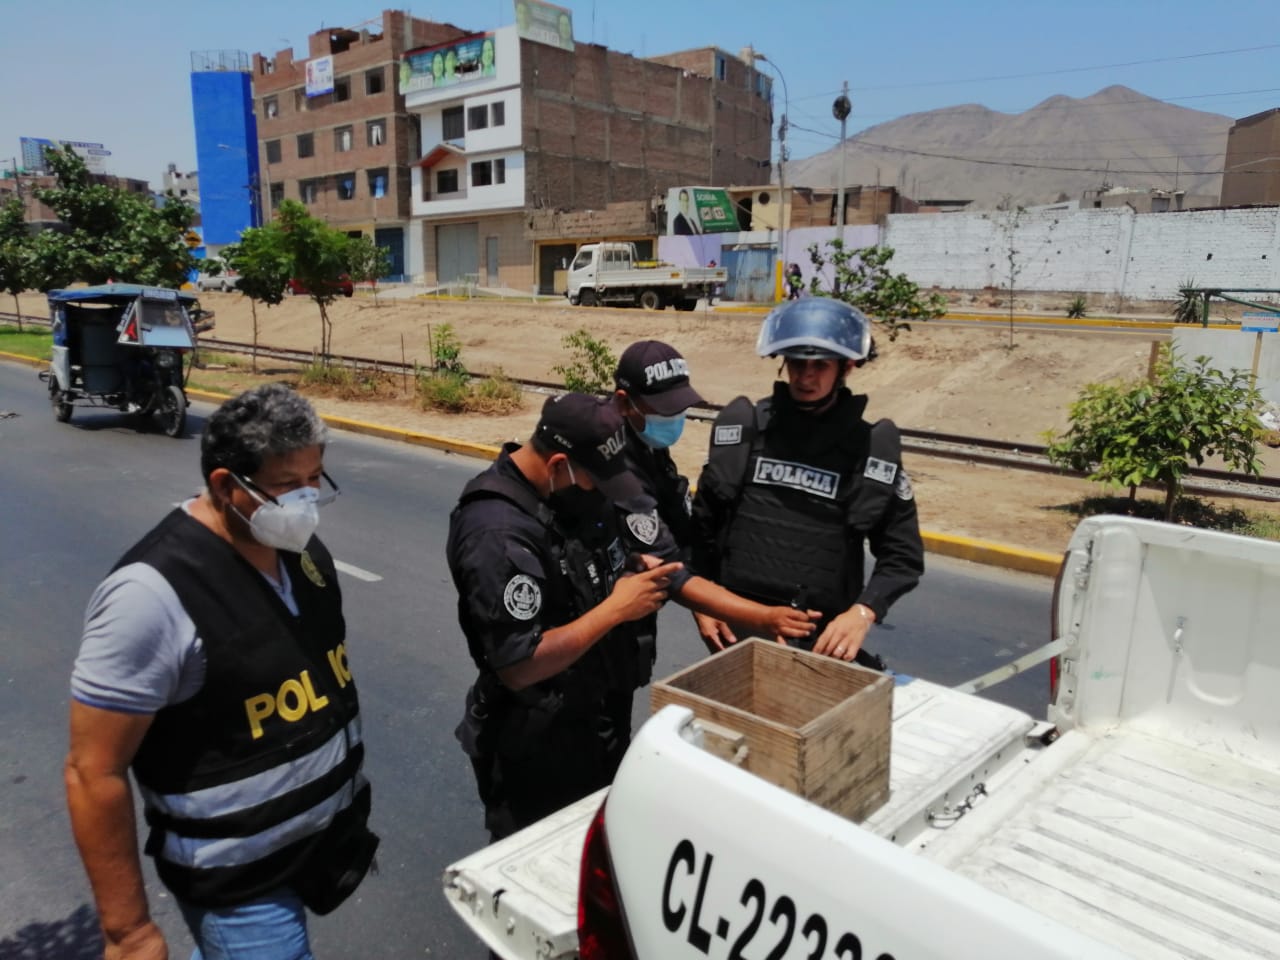 In Lima, explosives experts recover two undetonated grenades in a public square further to a lead exchanged during operations